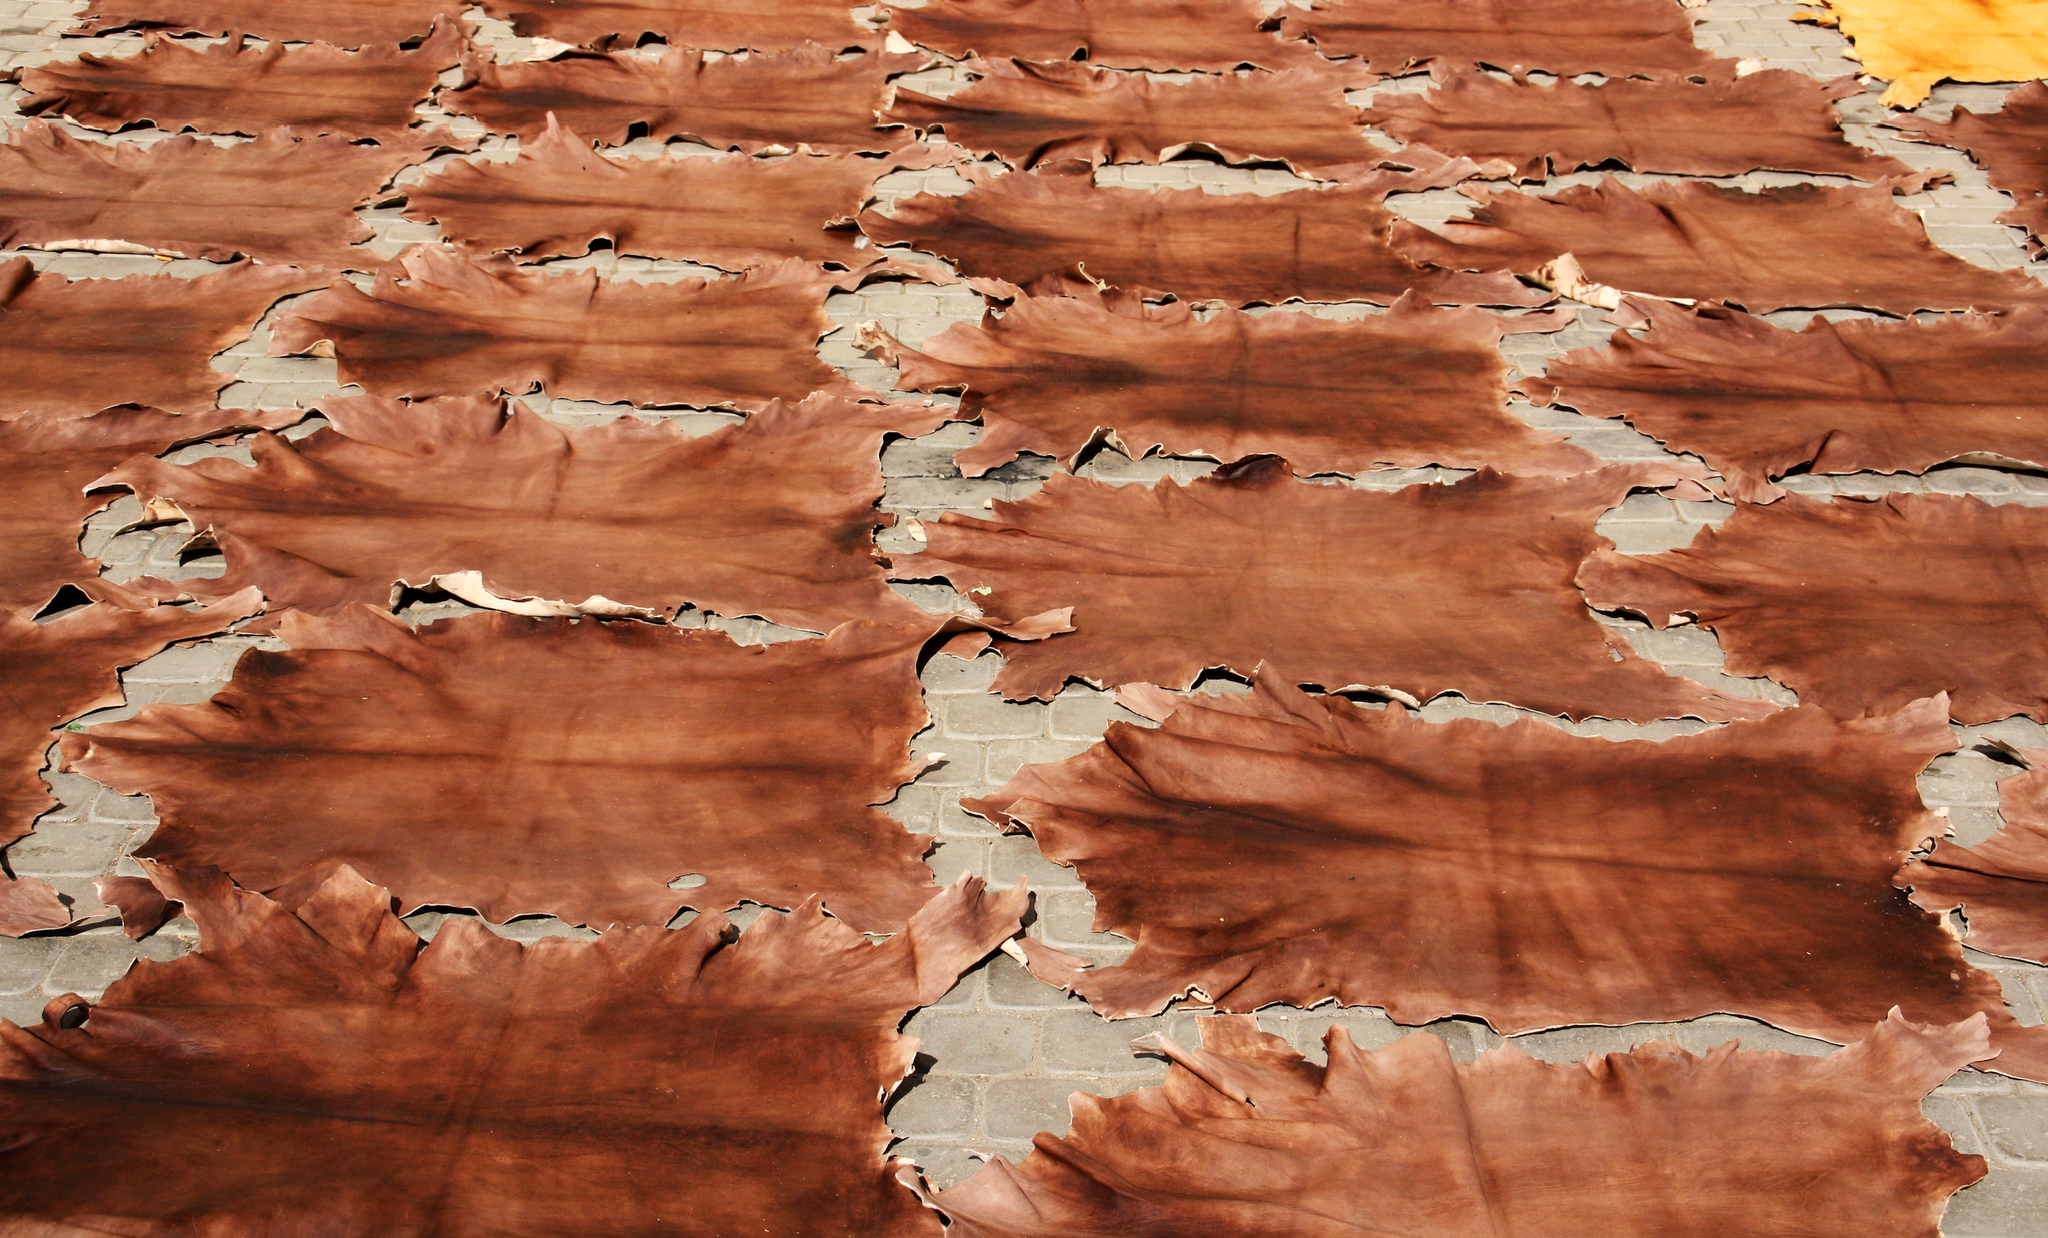 leather drying in morocco